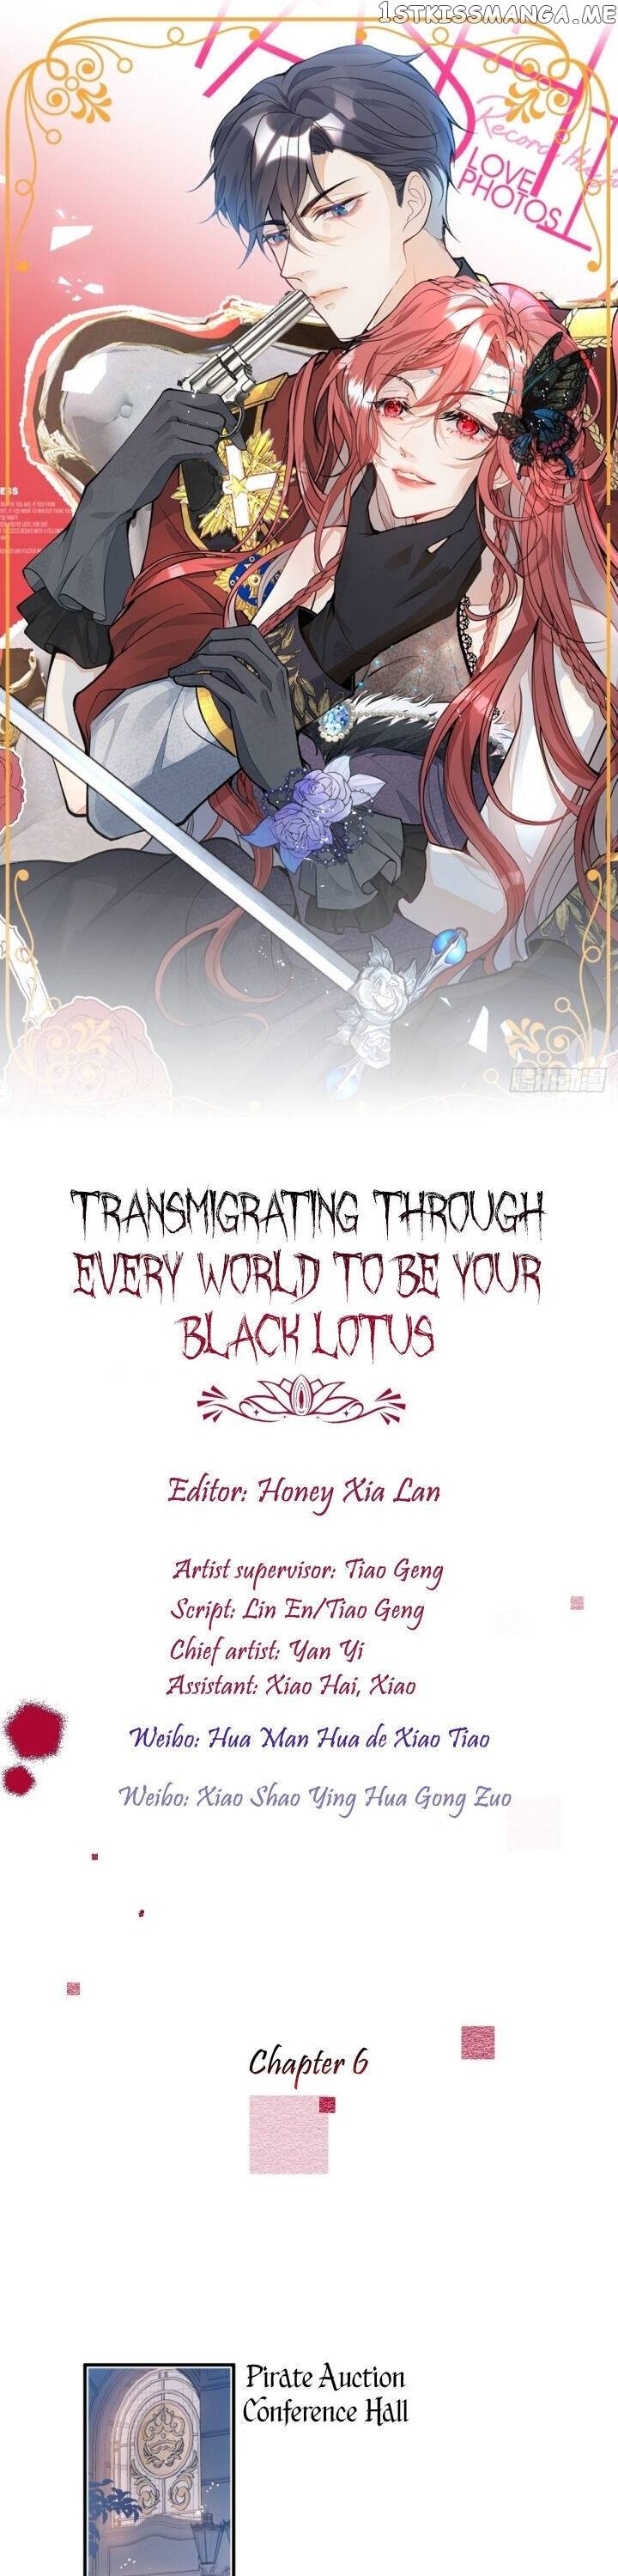 Transmigrating Through Every World To Be Your Black Lotus chapter 6